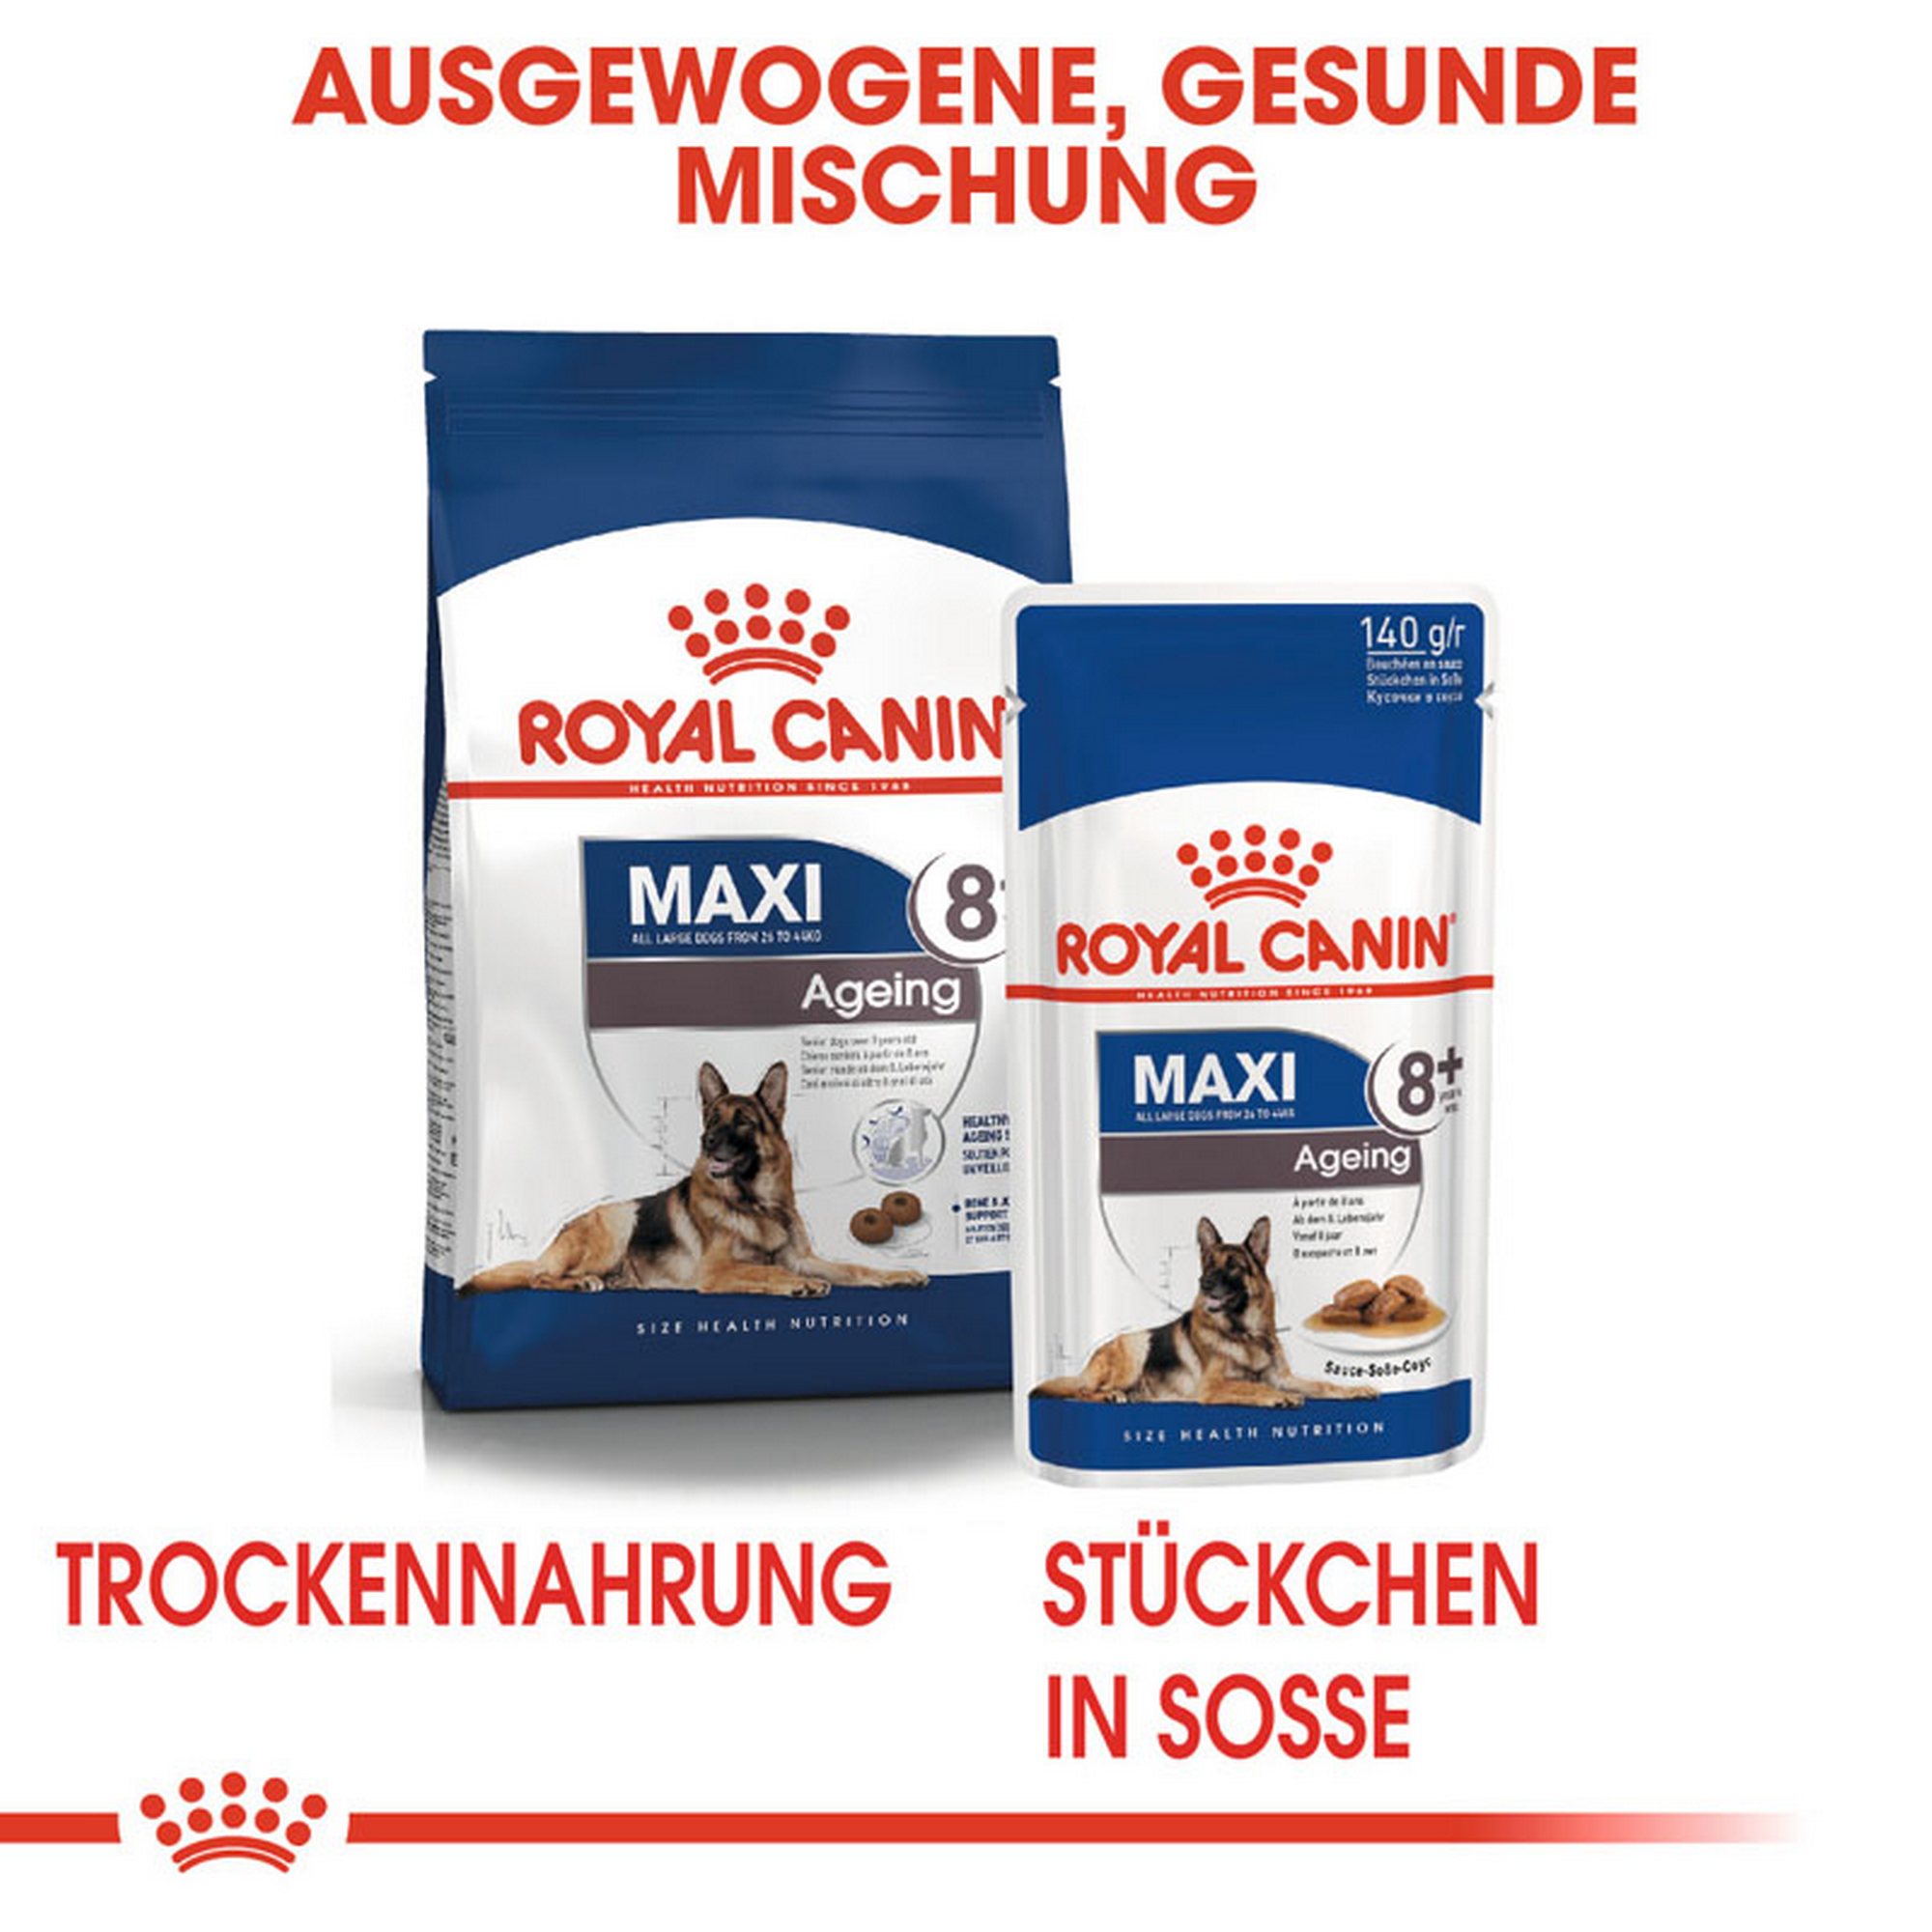 ROYAL CANIN MAXI Ageing 8+ Nassfutter für ältere große Hunde + product picture